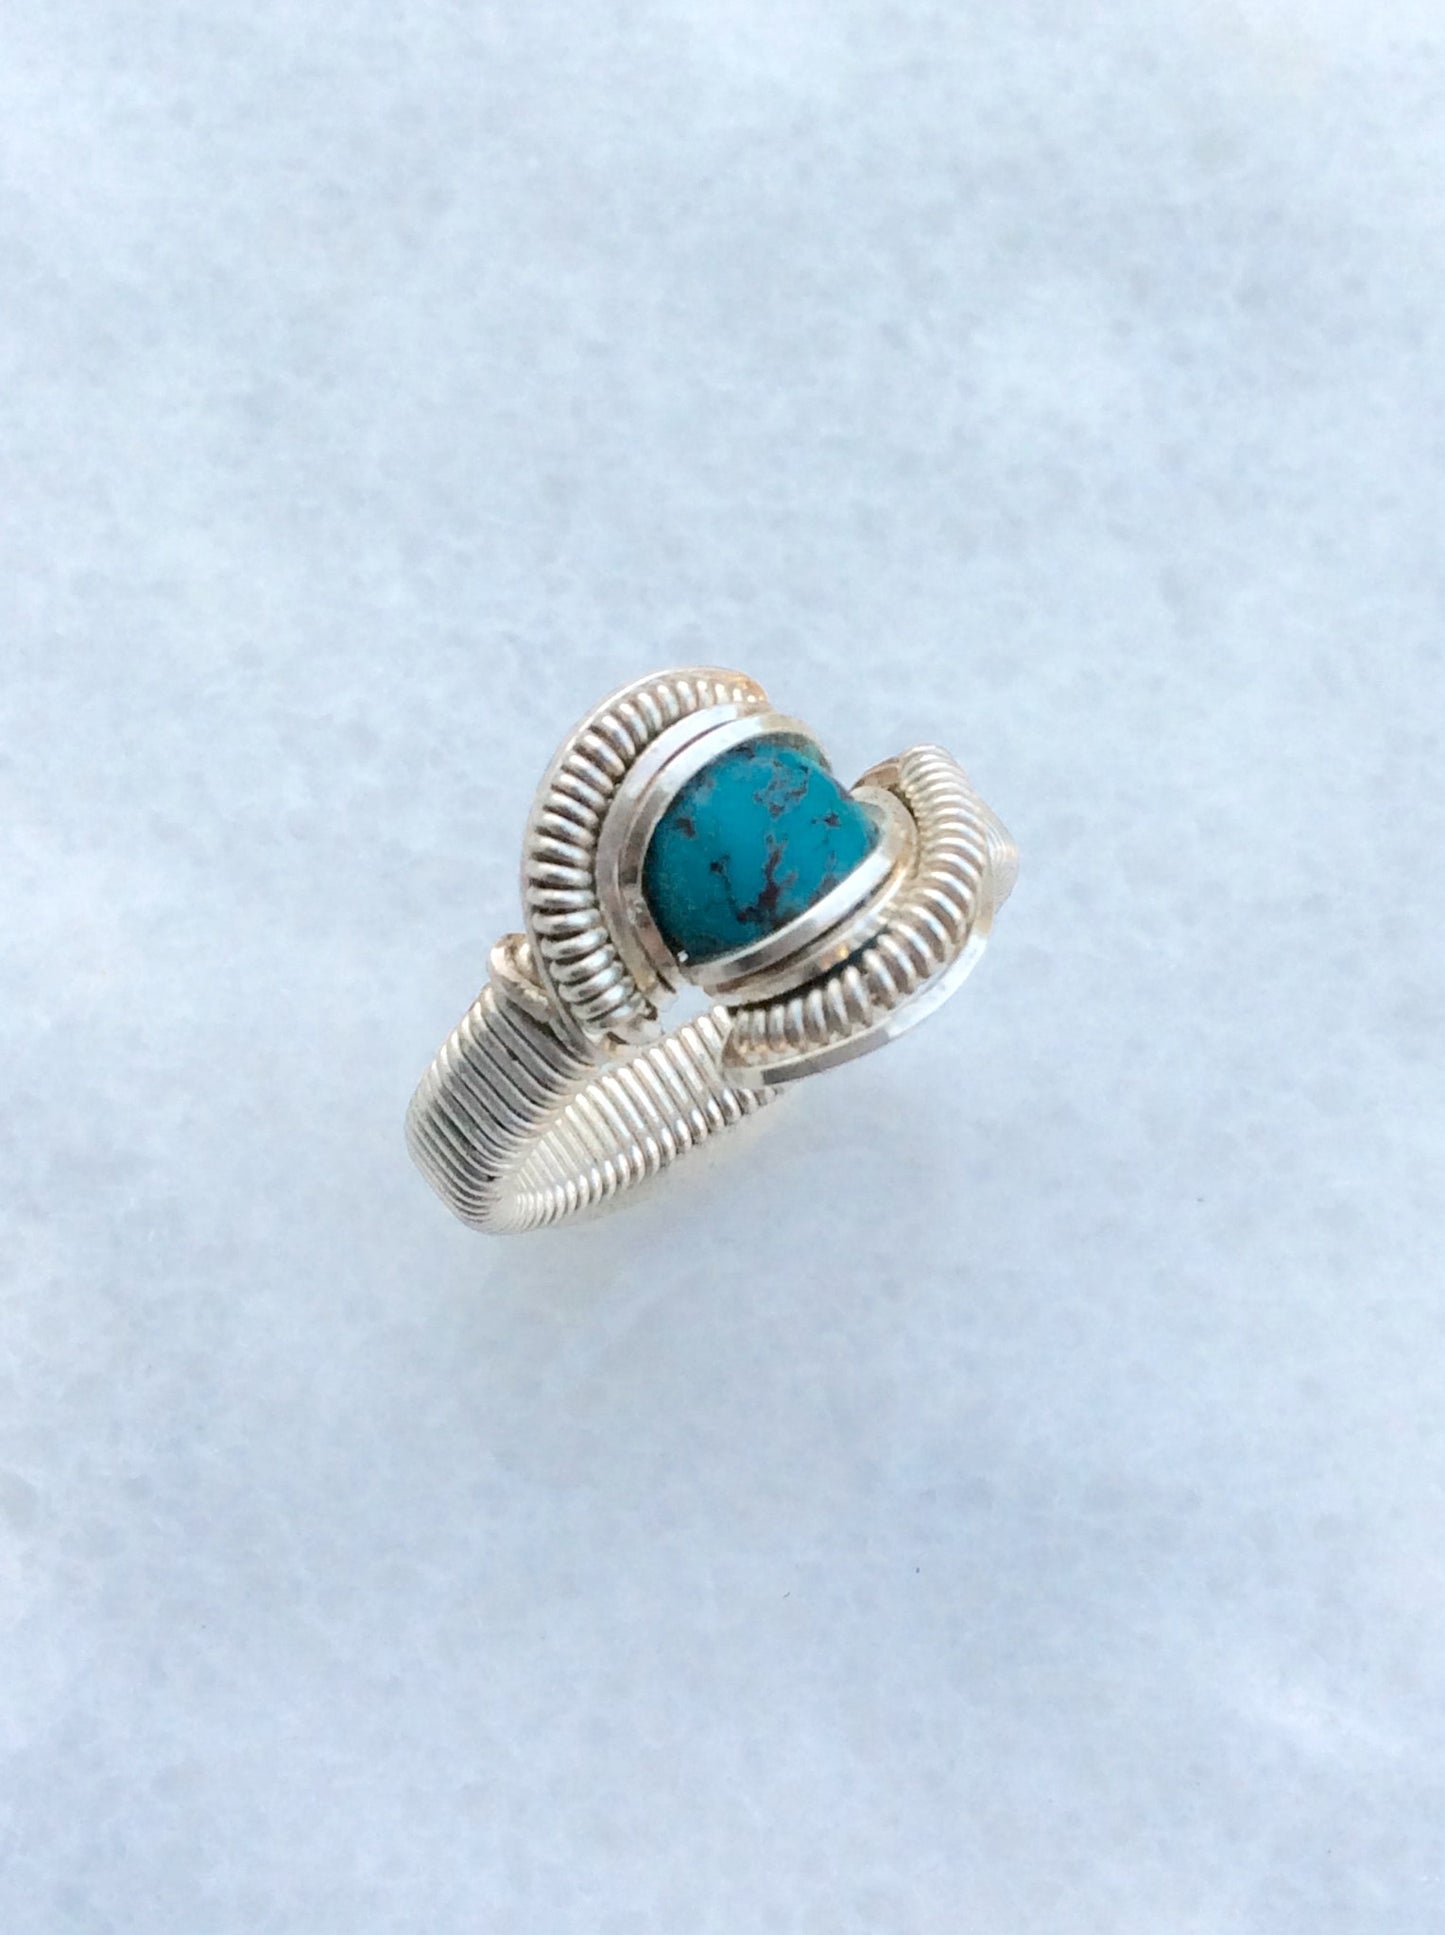 Turquoise Wire Wrap Ring